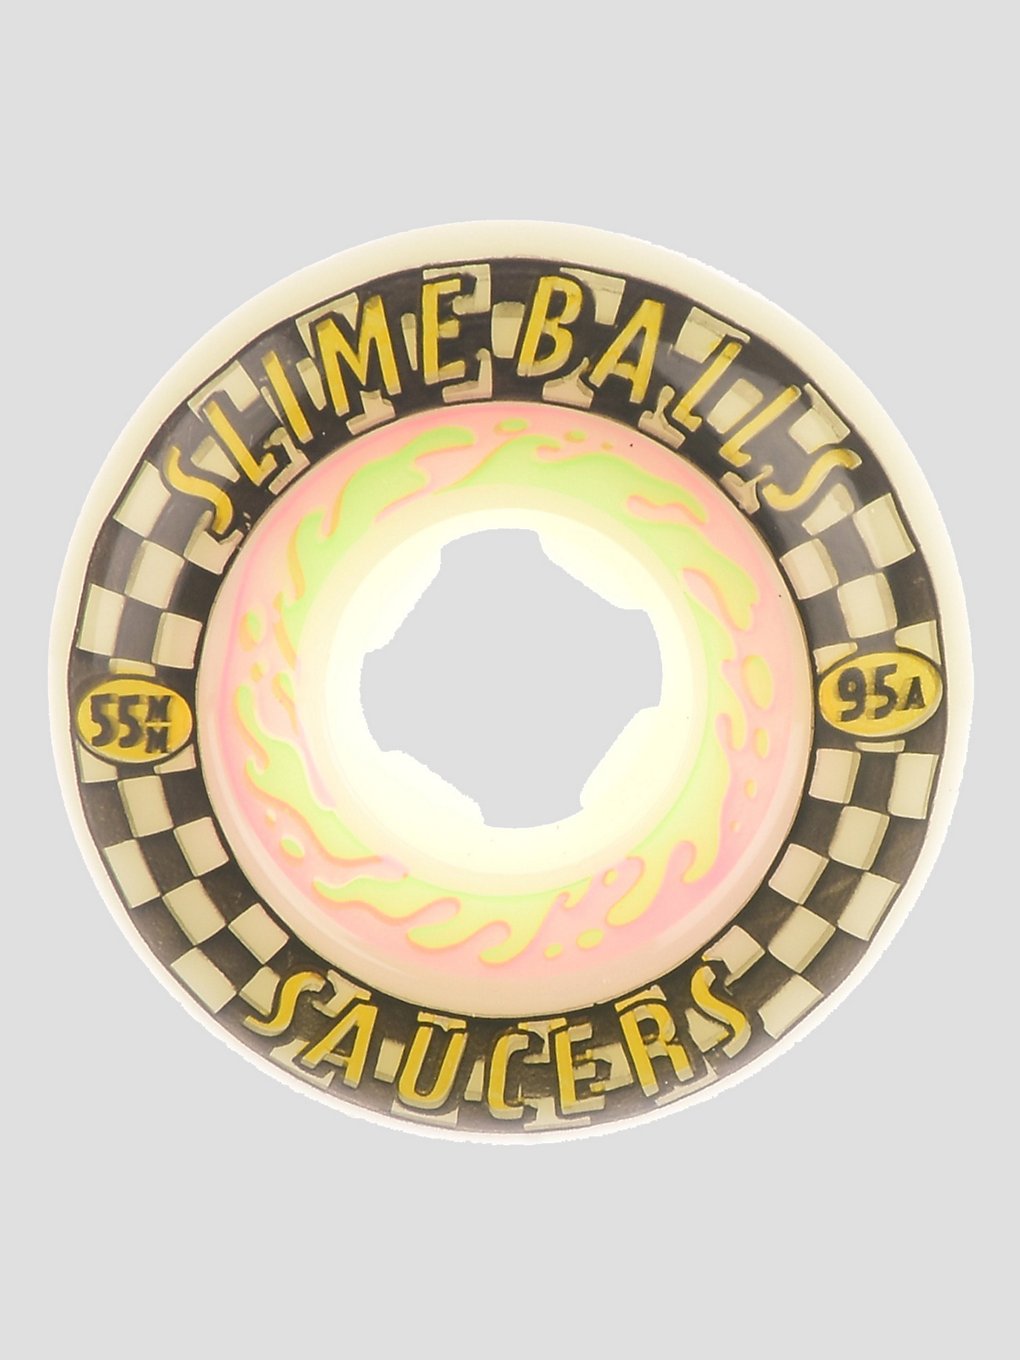 Slime Balls Saucers 95A 55mm Wheels yellow kaufen